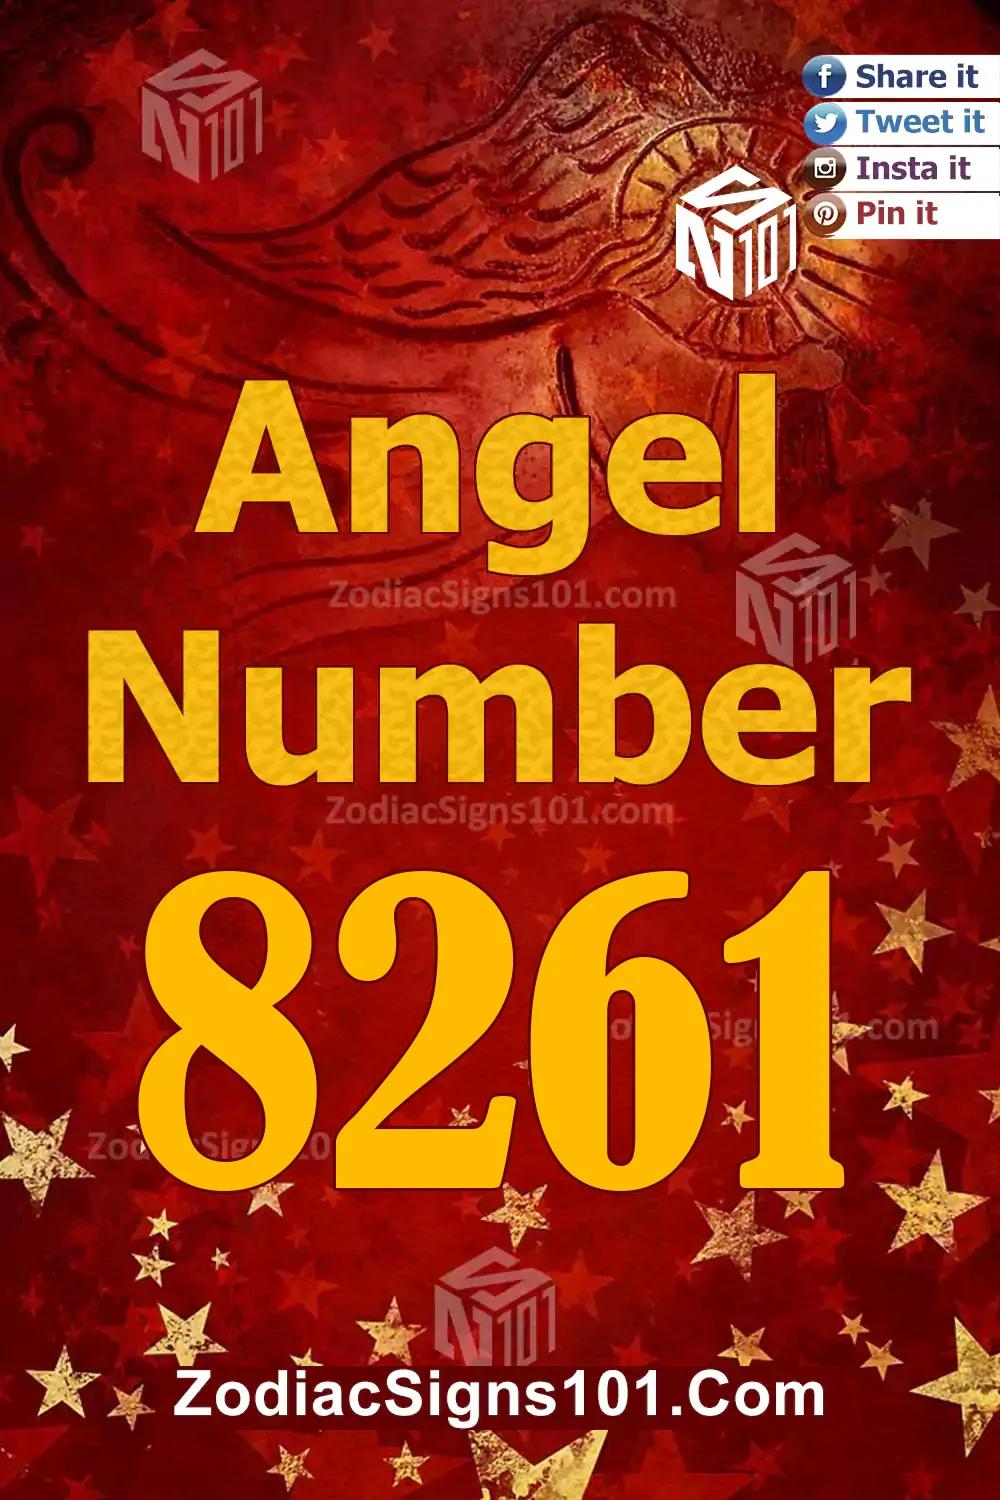 8261 Angel Number Meaning